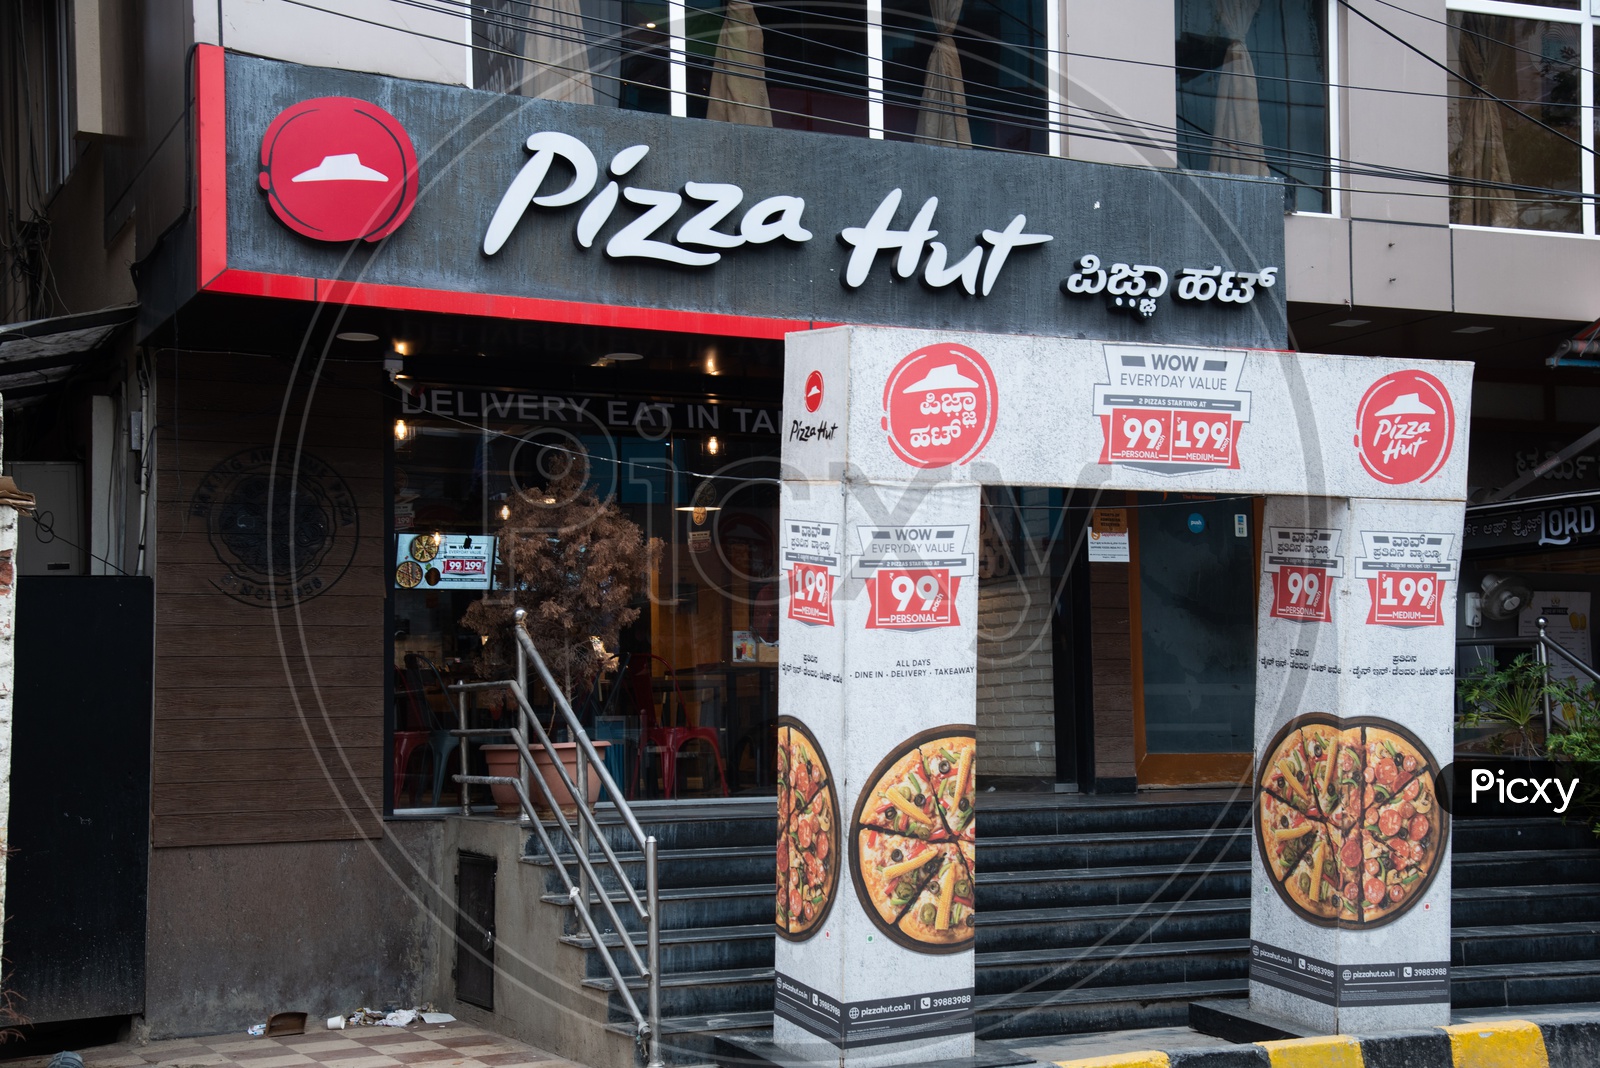 Pizza Hut, An American Pizza and fast food chain